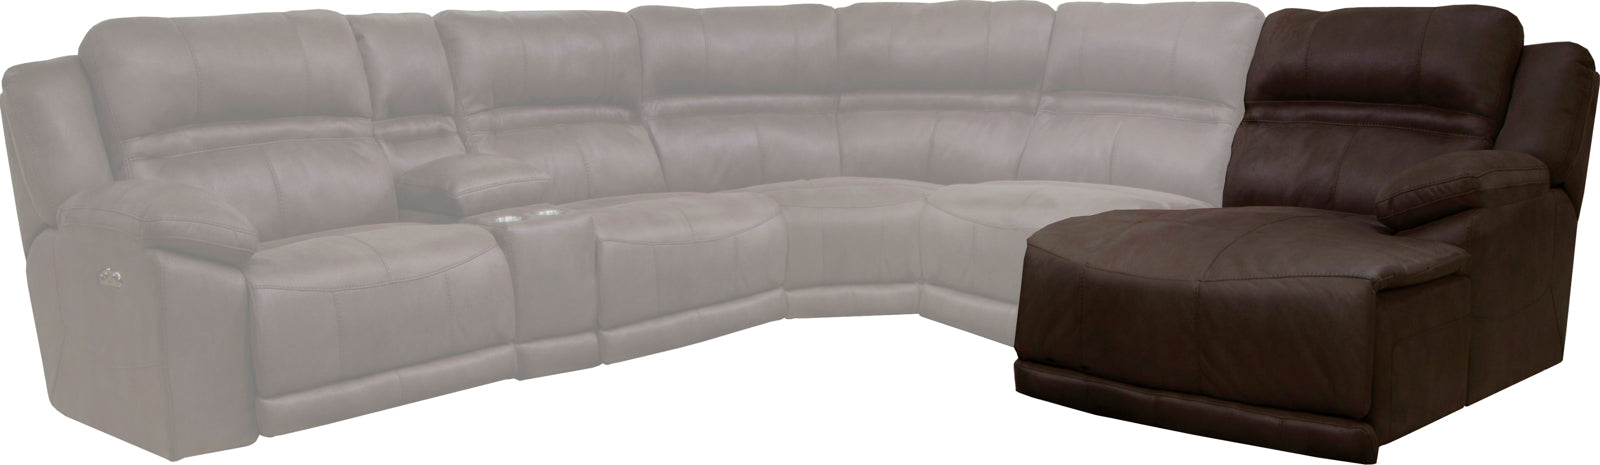 Catnapper Braxton RSF Chaise in Dark Chocolate 2153 image